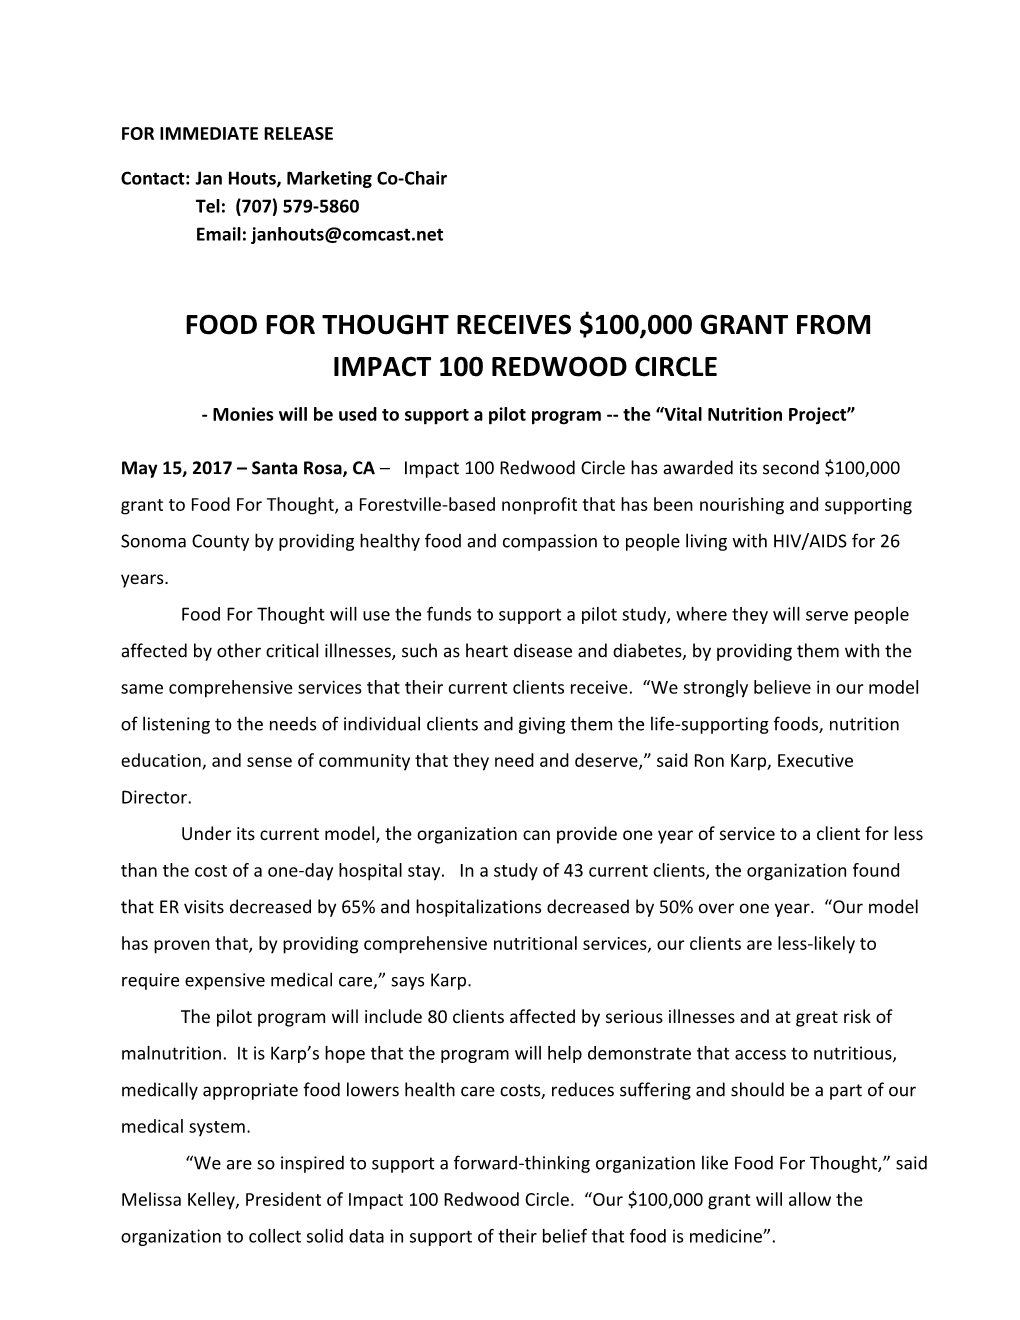 Food for Thought Receives $100,000 Grant From